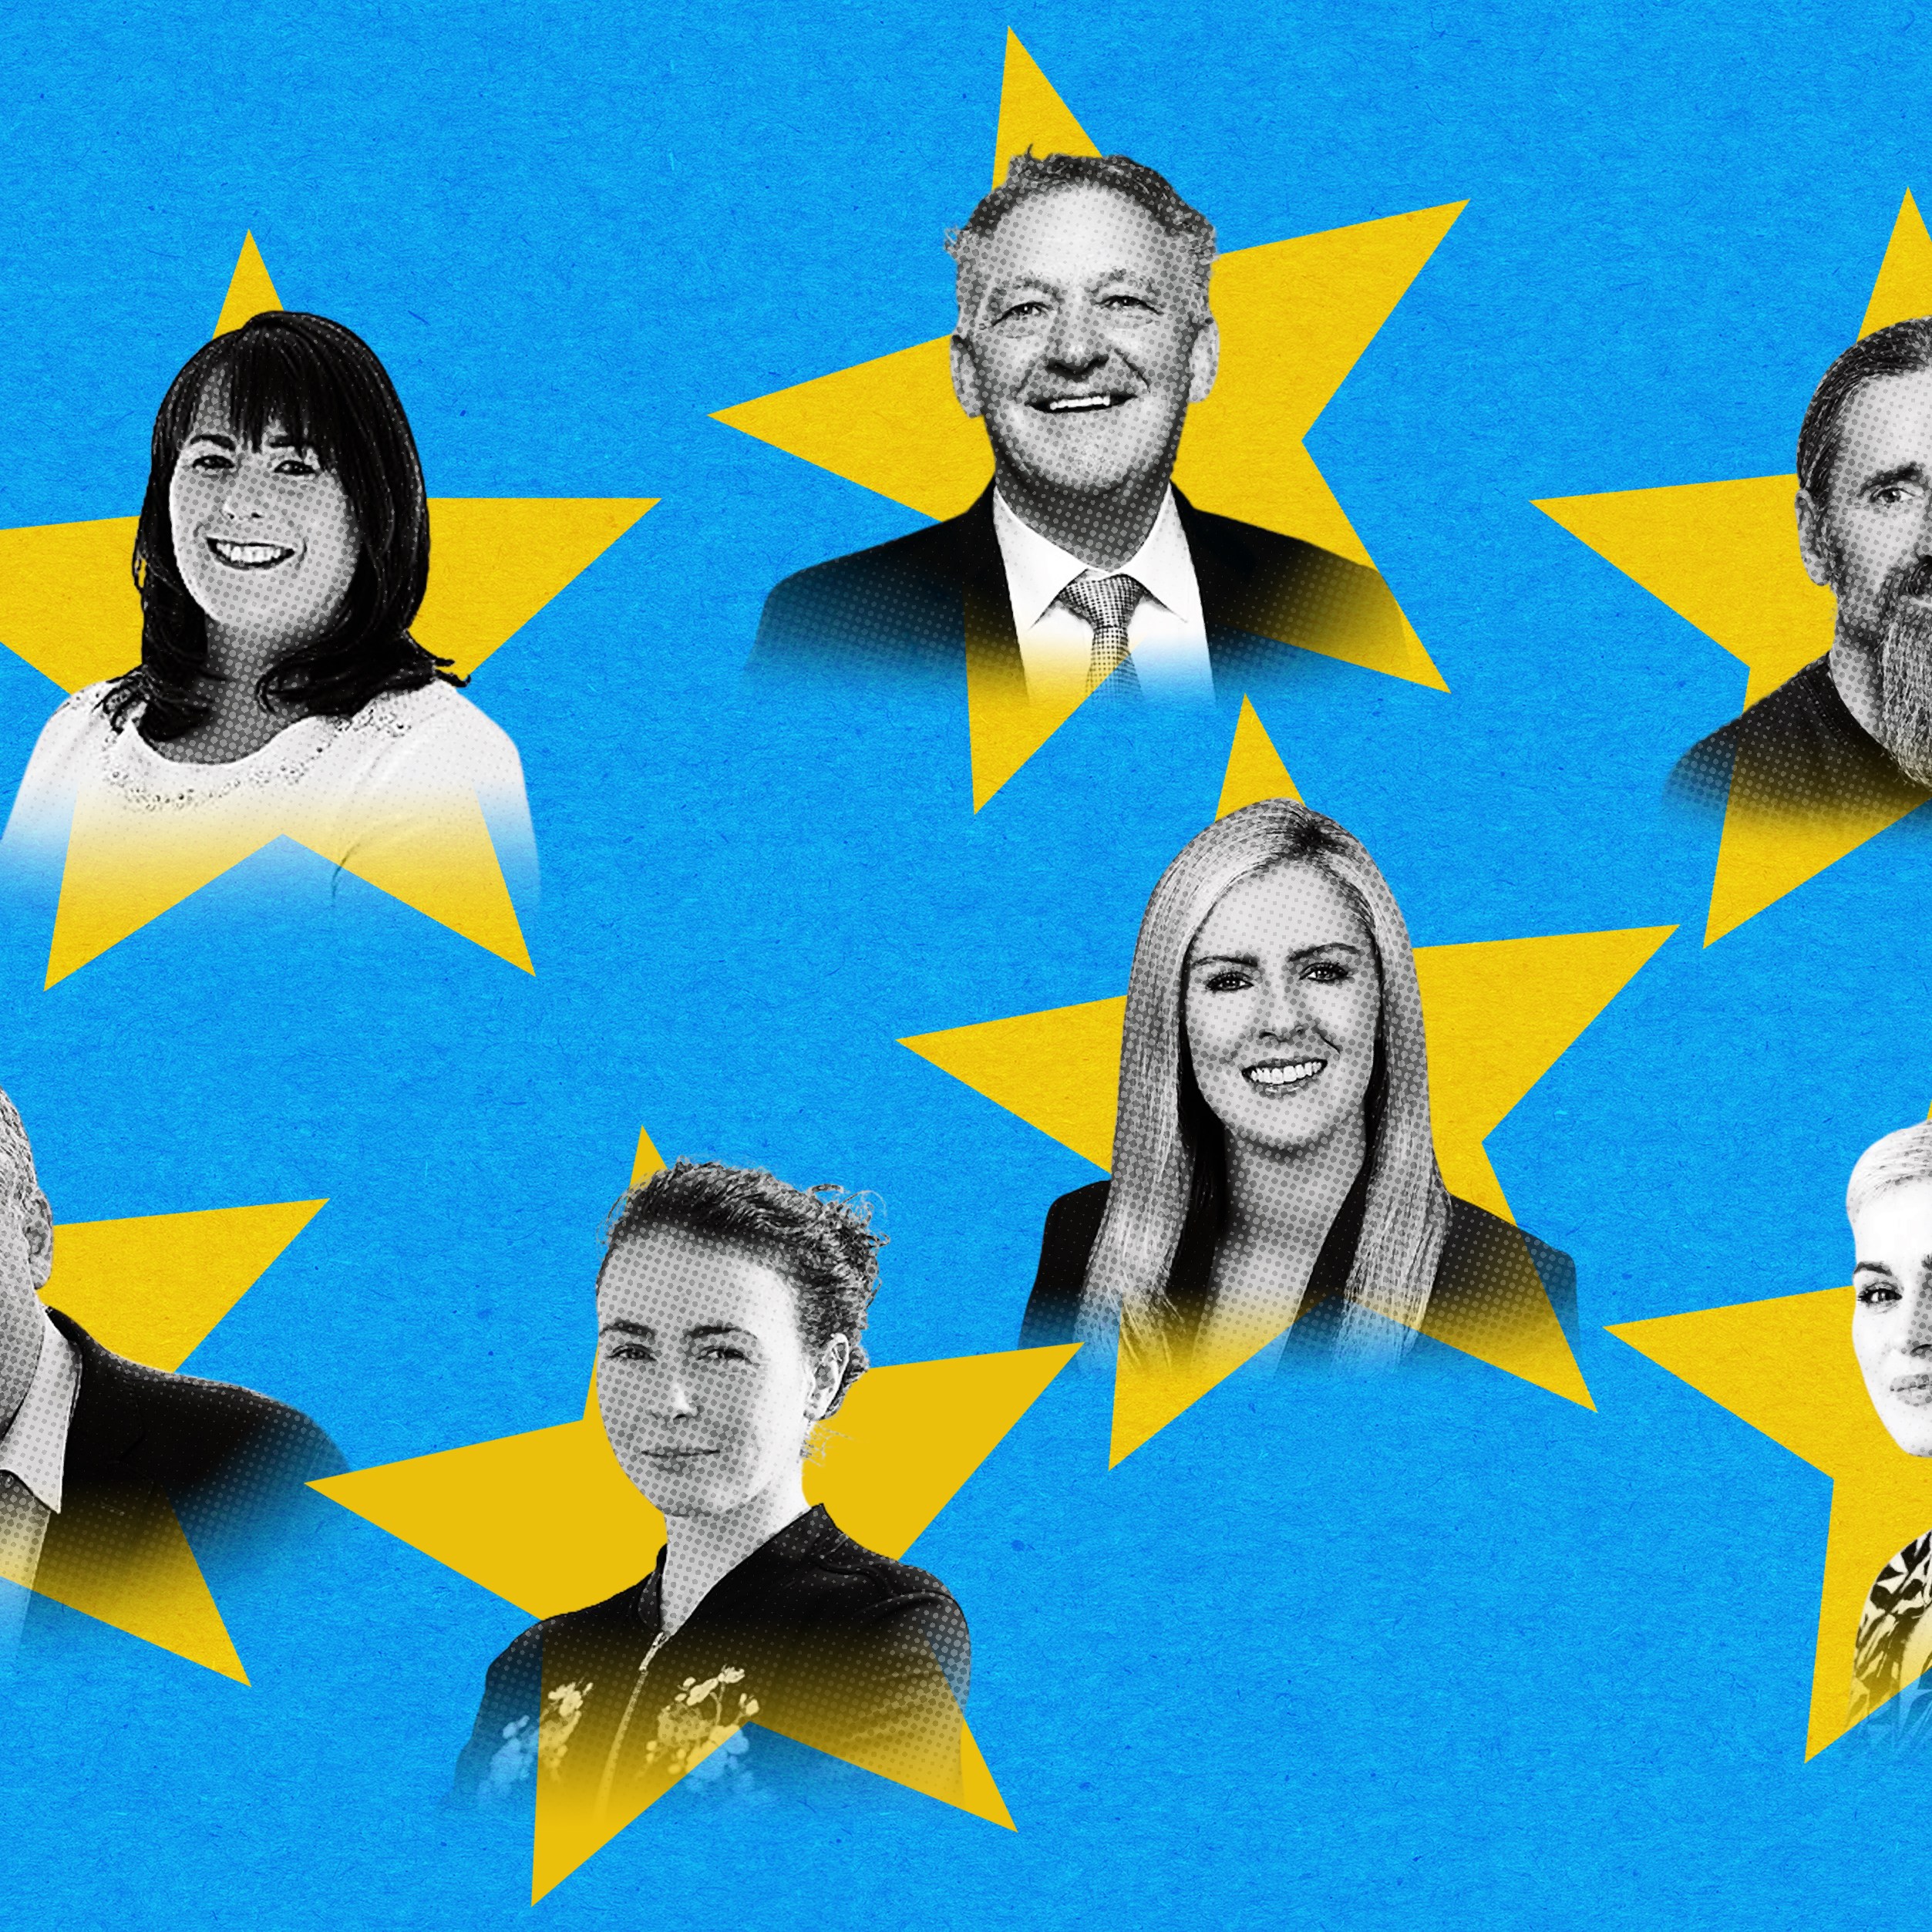 Midlands-North-West MEP candidates, clockwise from top: Peter Casey, Luke “Ming” Flanagan, Maria Walsh, Saoirse McHugh, Ciaran Mullooly, Michelle Gildernew and, centre, Lisa Chambers